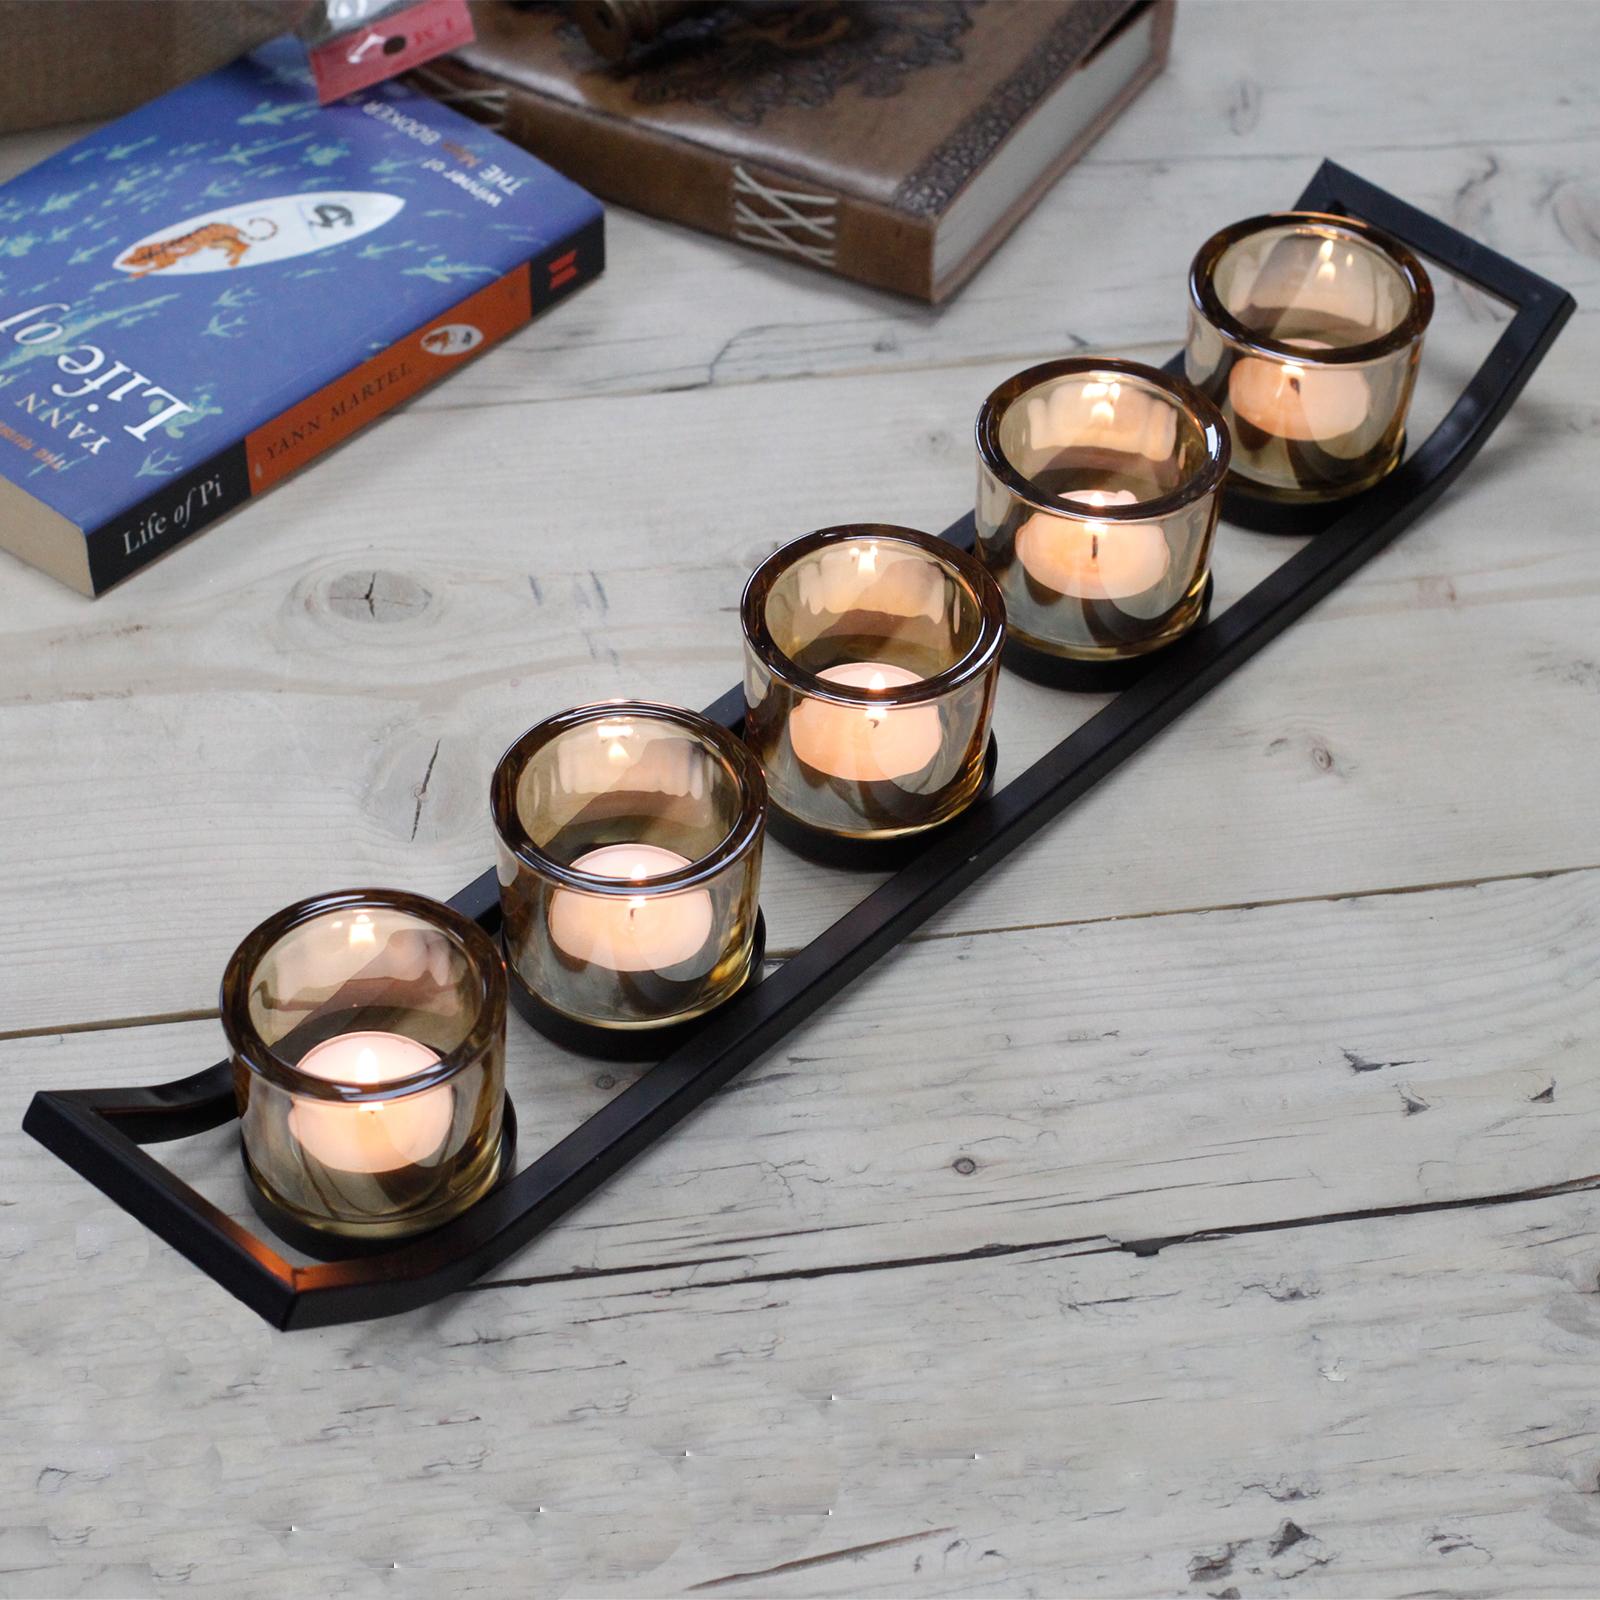 5-glass candle holder